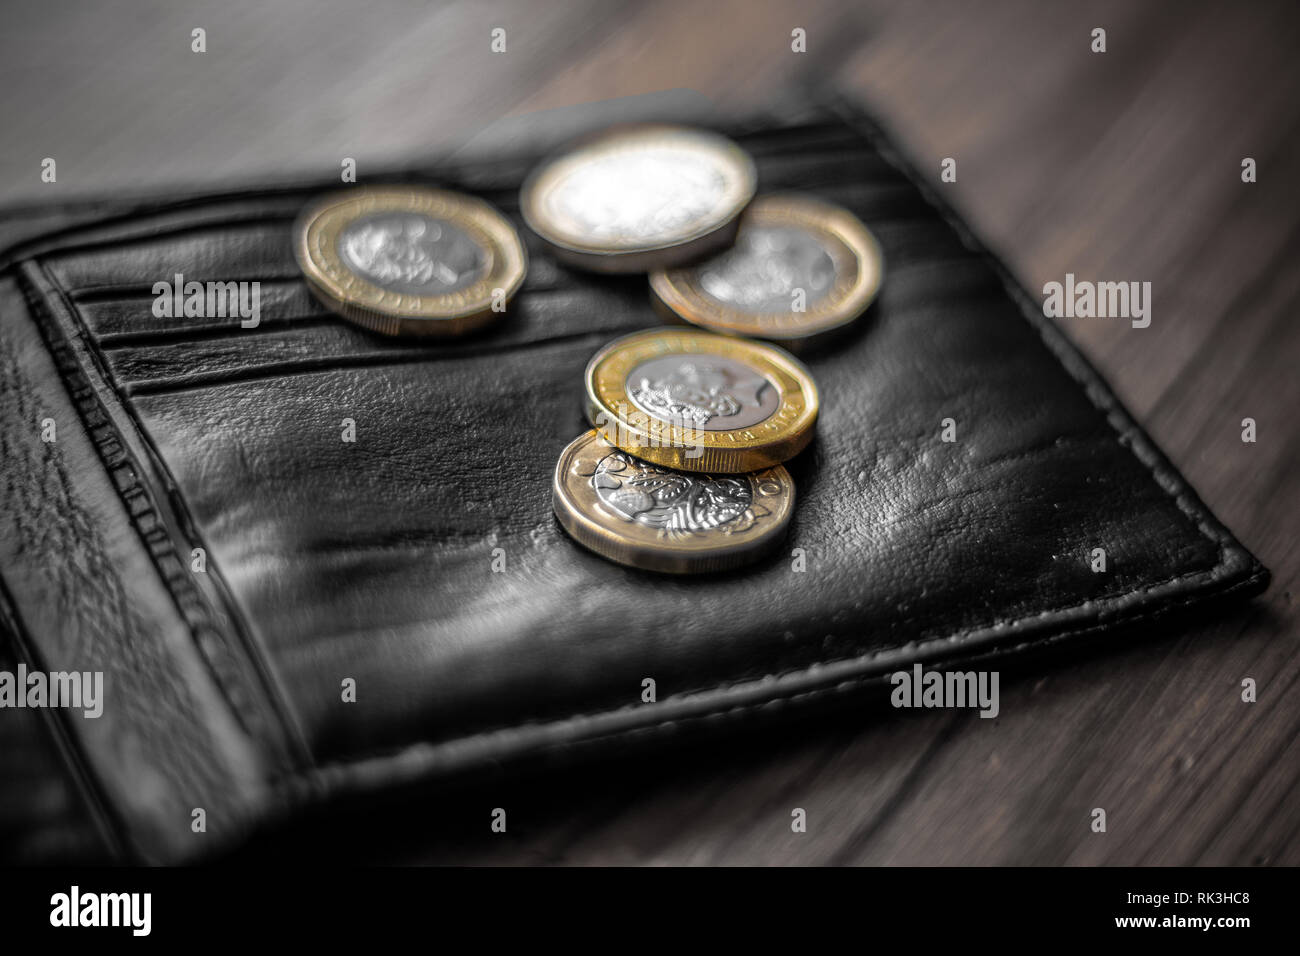 New Great British Pound GBP Coins laying casually on top of black wallet on wooden surface. Wealth, Money, Cash, Change. Stock Photo